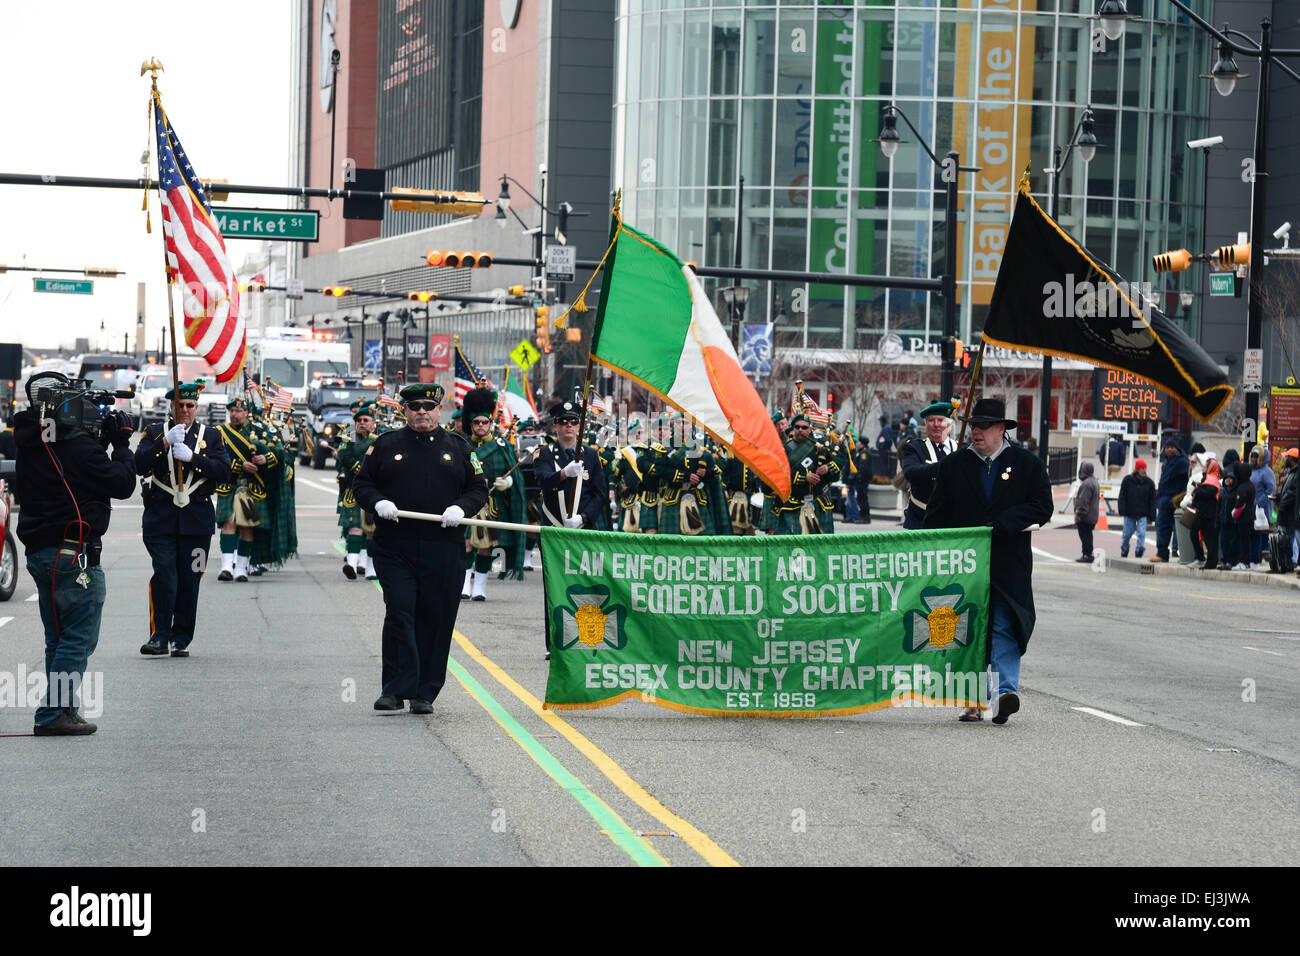 Law Enforcement and Firefighters Emerald Society of New Jersey during the 2013 St. Patrick's Day parade. Newark, New Jersey. USA Stock Photo